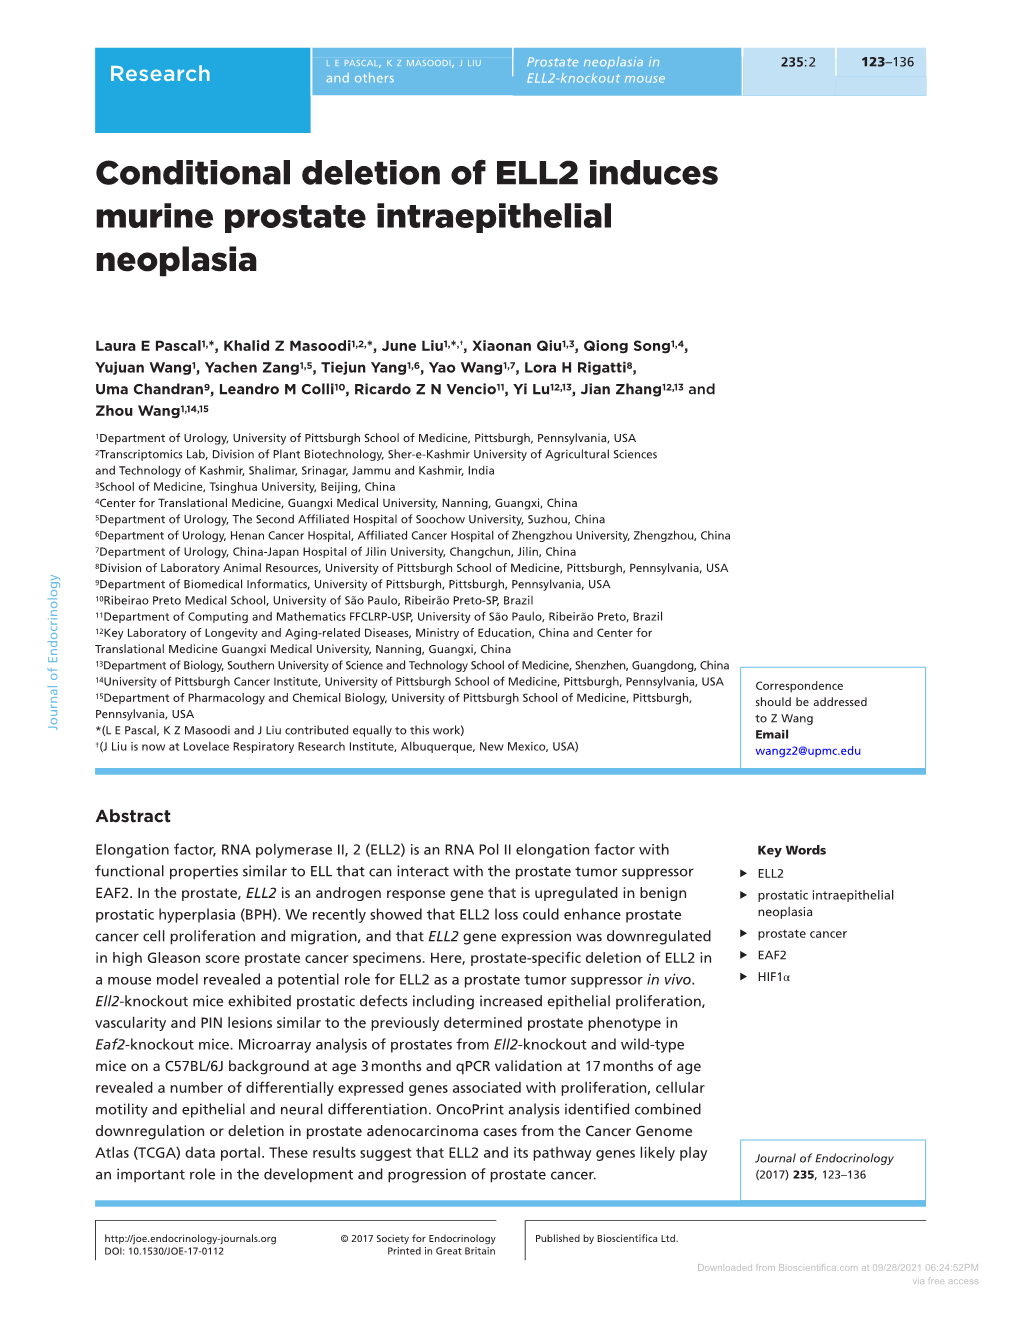 Conditional Deletion of ELL2 Induces Murine Prostate Intraepithelial Neoplasia